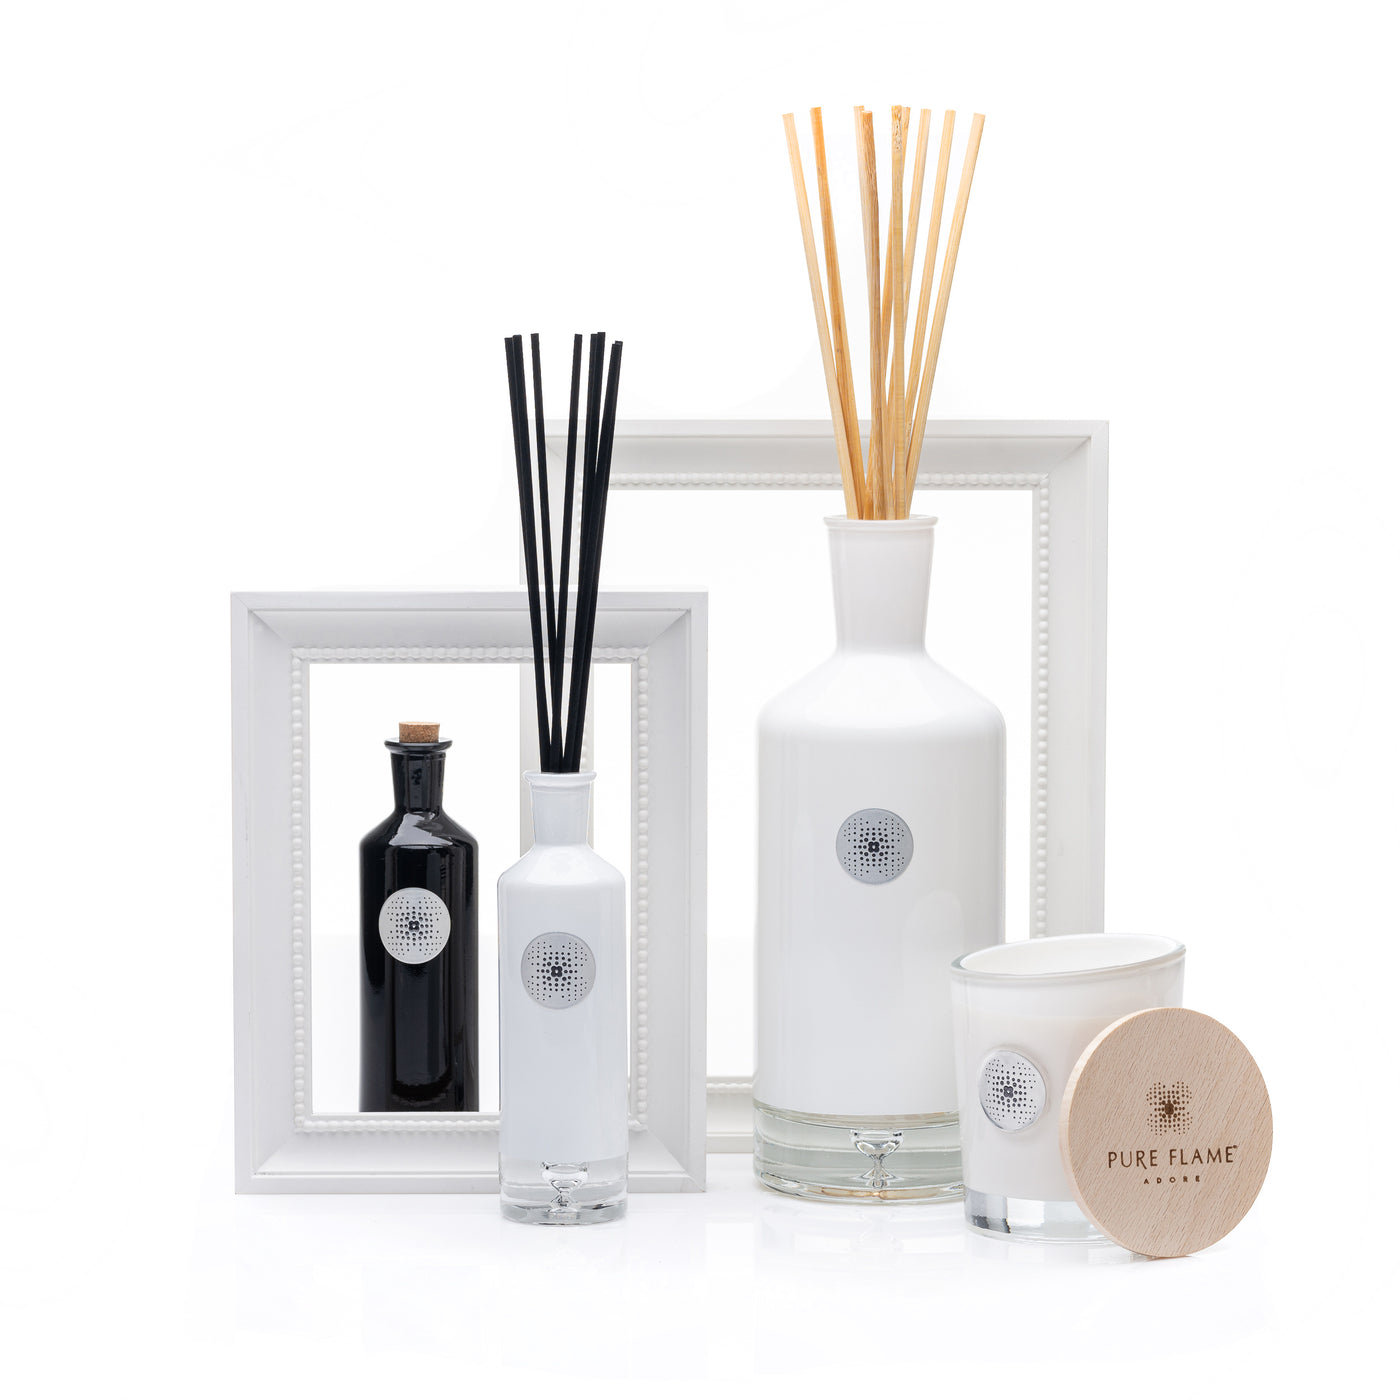 LIFE IS BEAUTIFUL "Adore" home fragrance